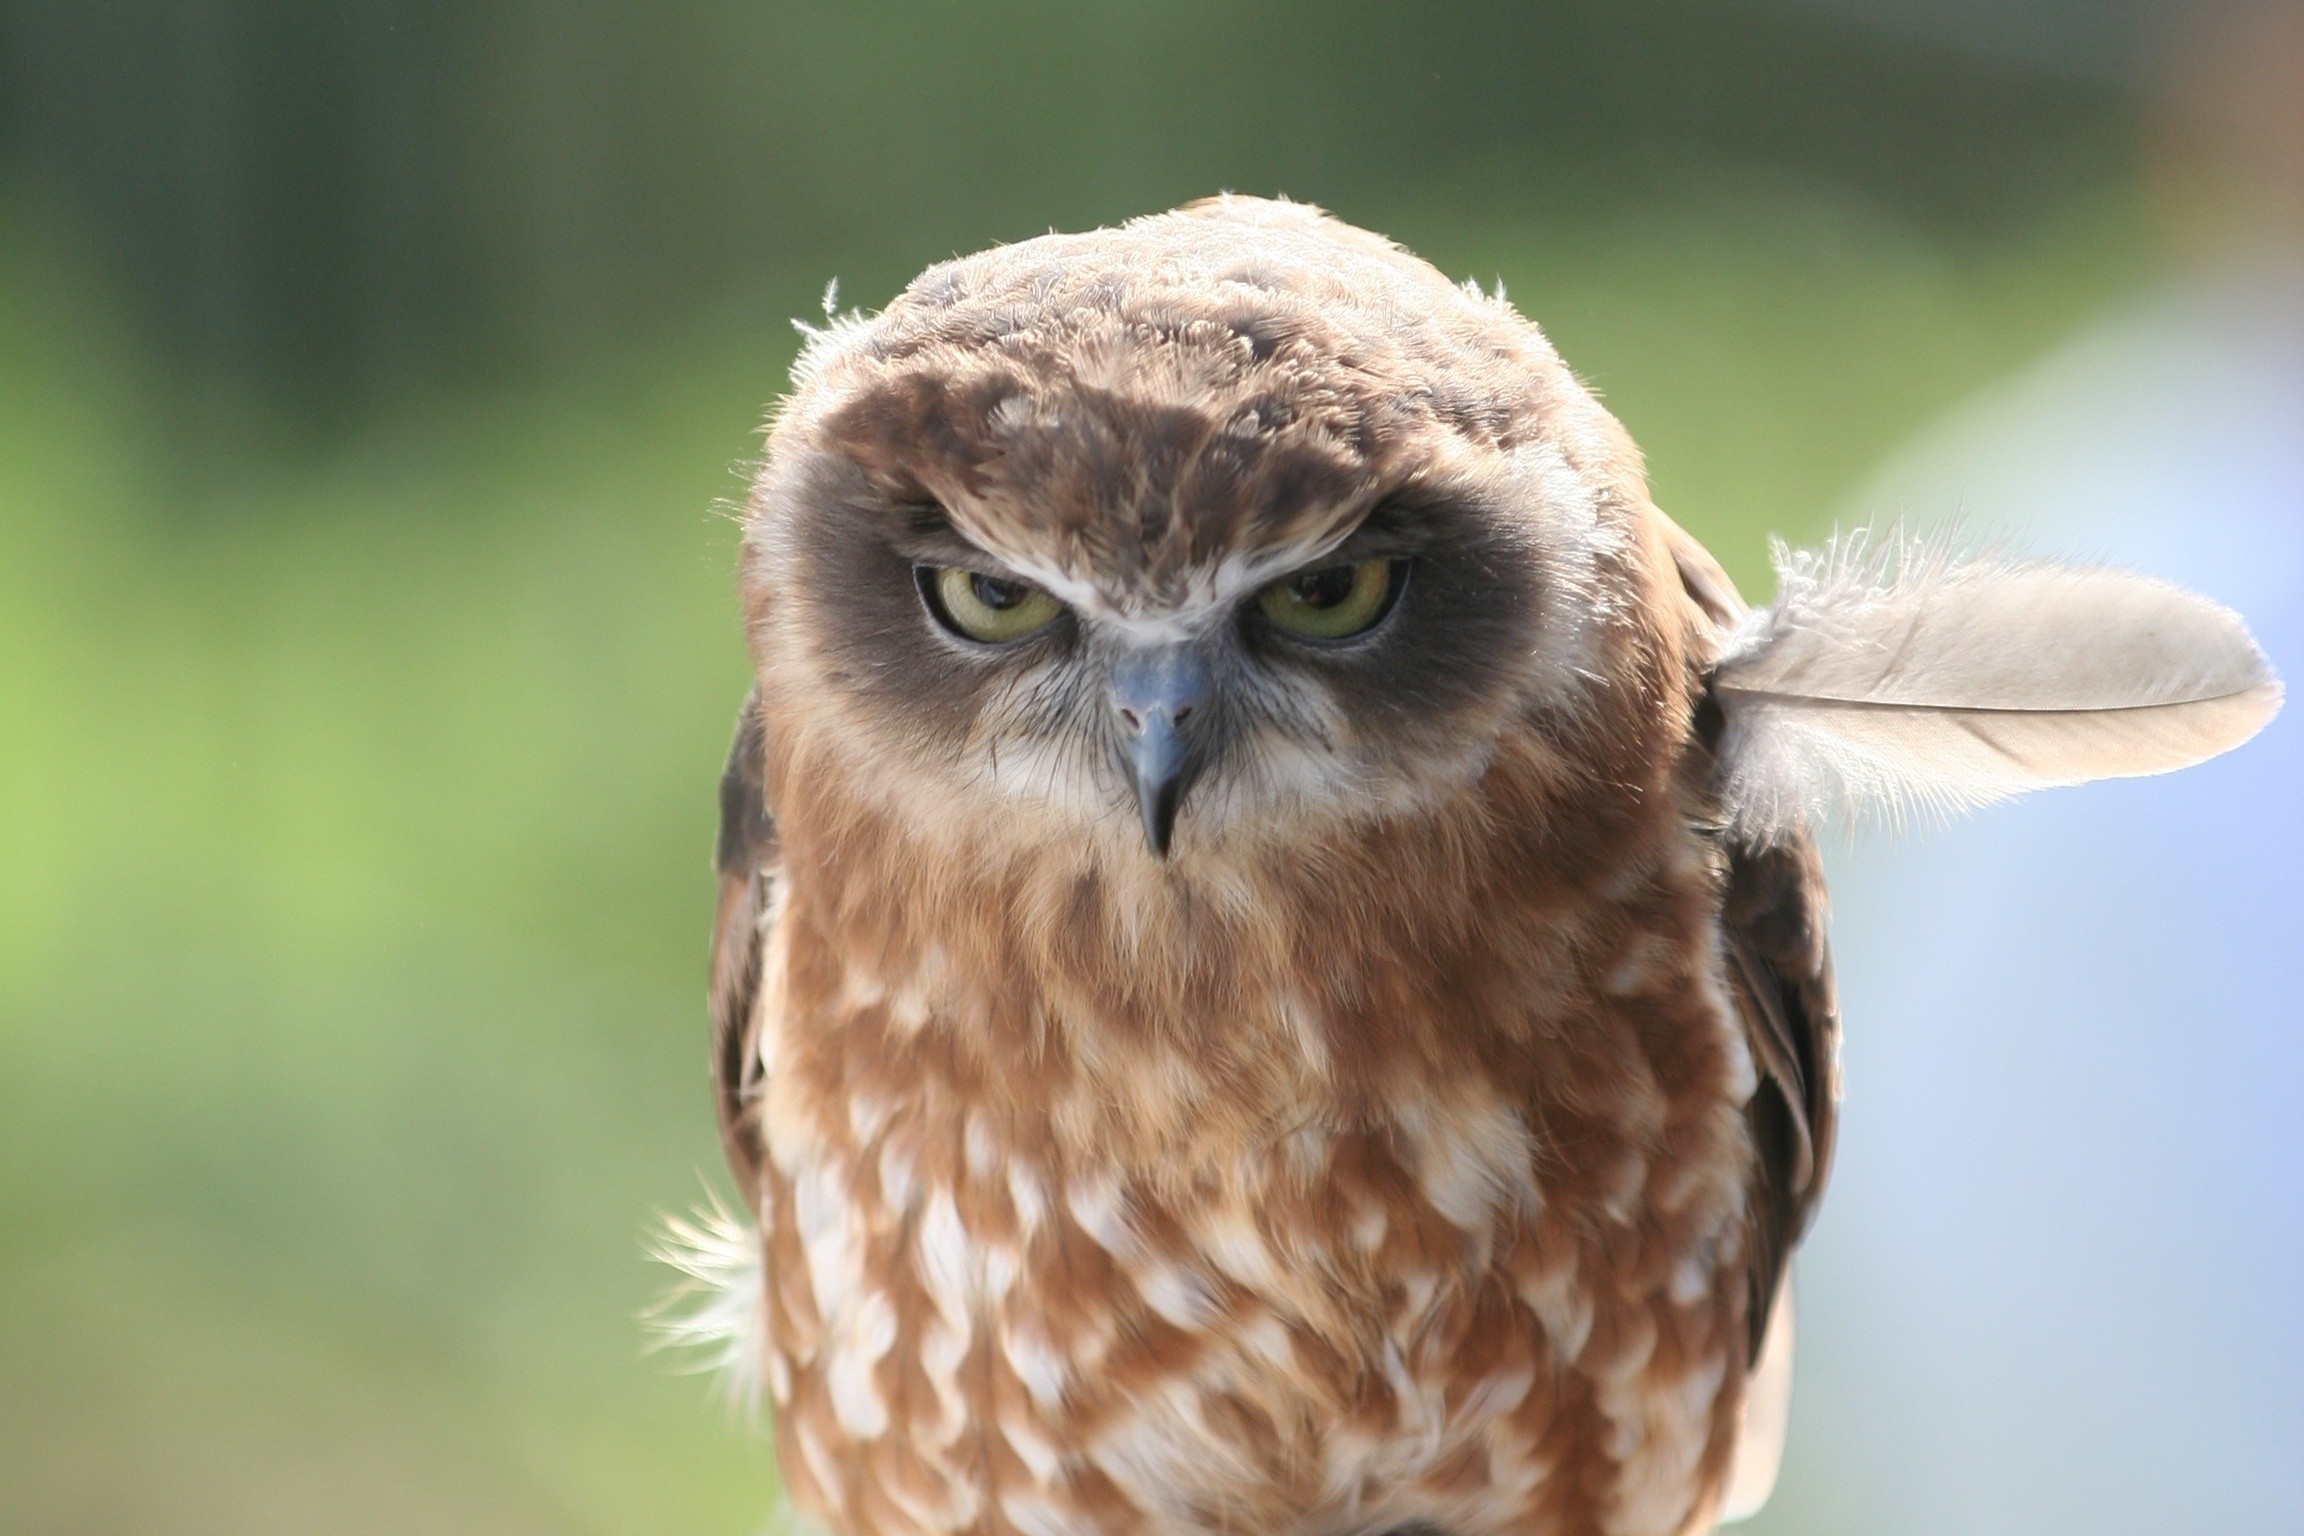 133169 download wallpaper animals, owl, feather, predator, sight, opinion, pen, anger screensavers and pictures for free